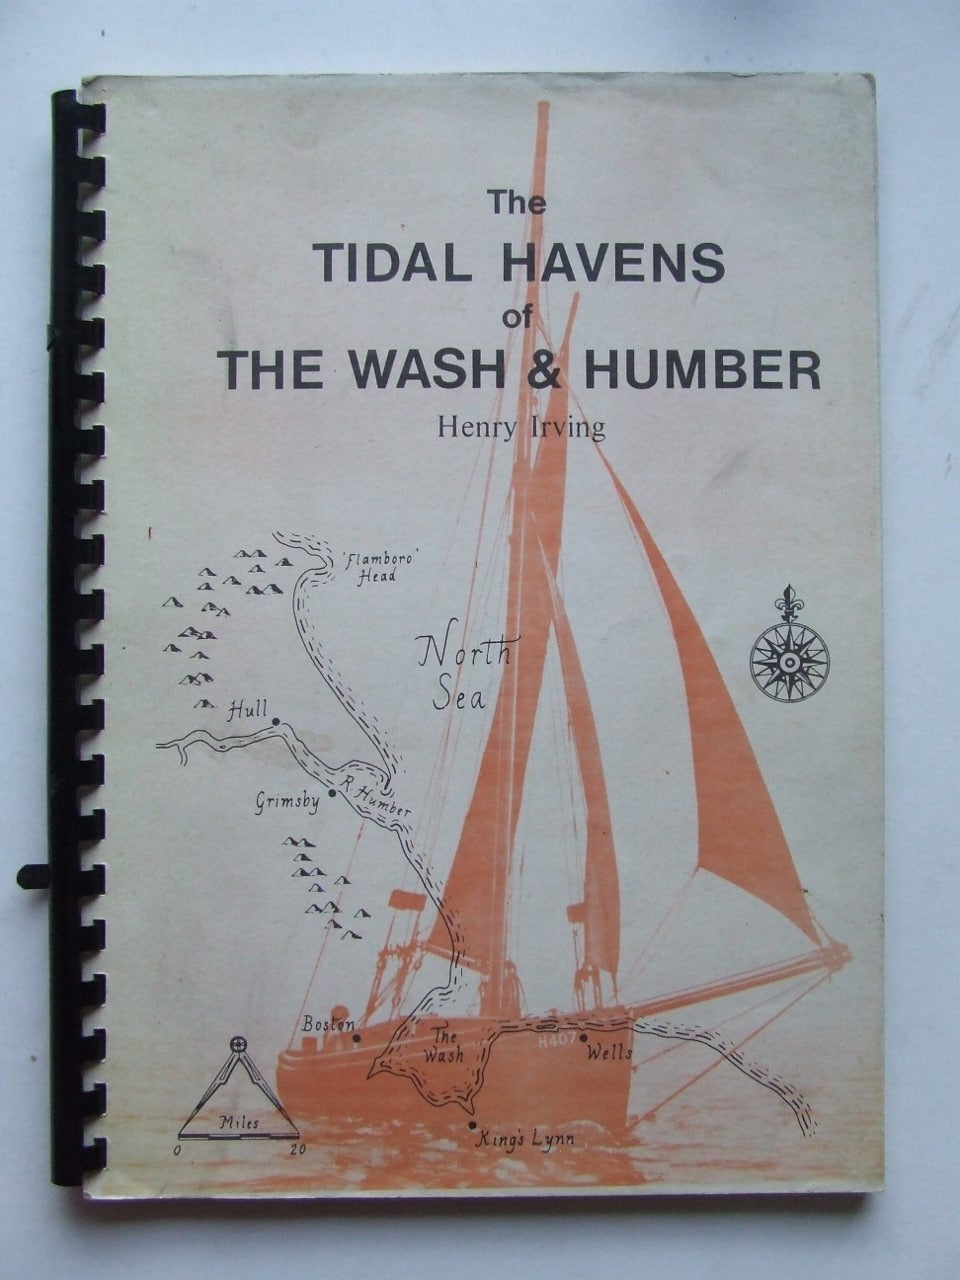 The Tidal Havens of the Wash and Humber